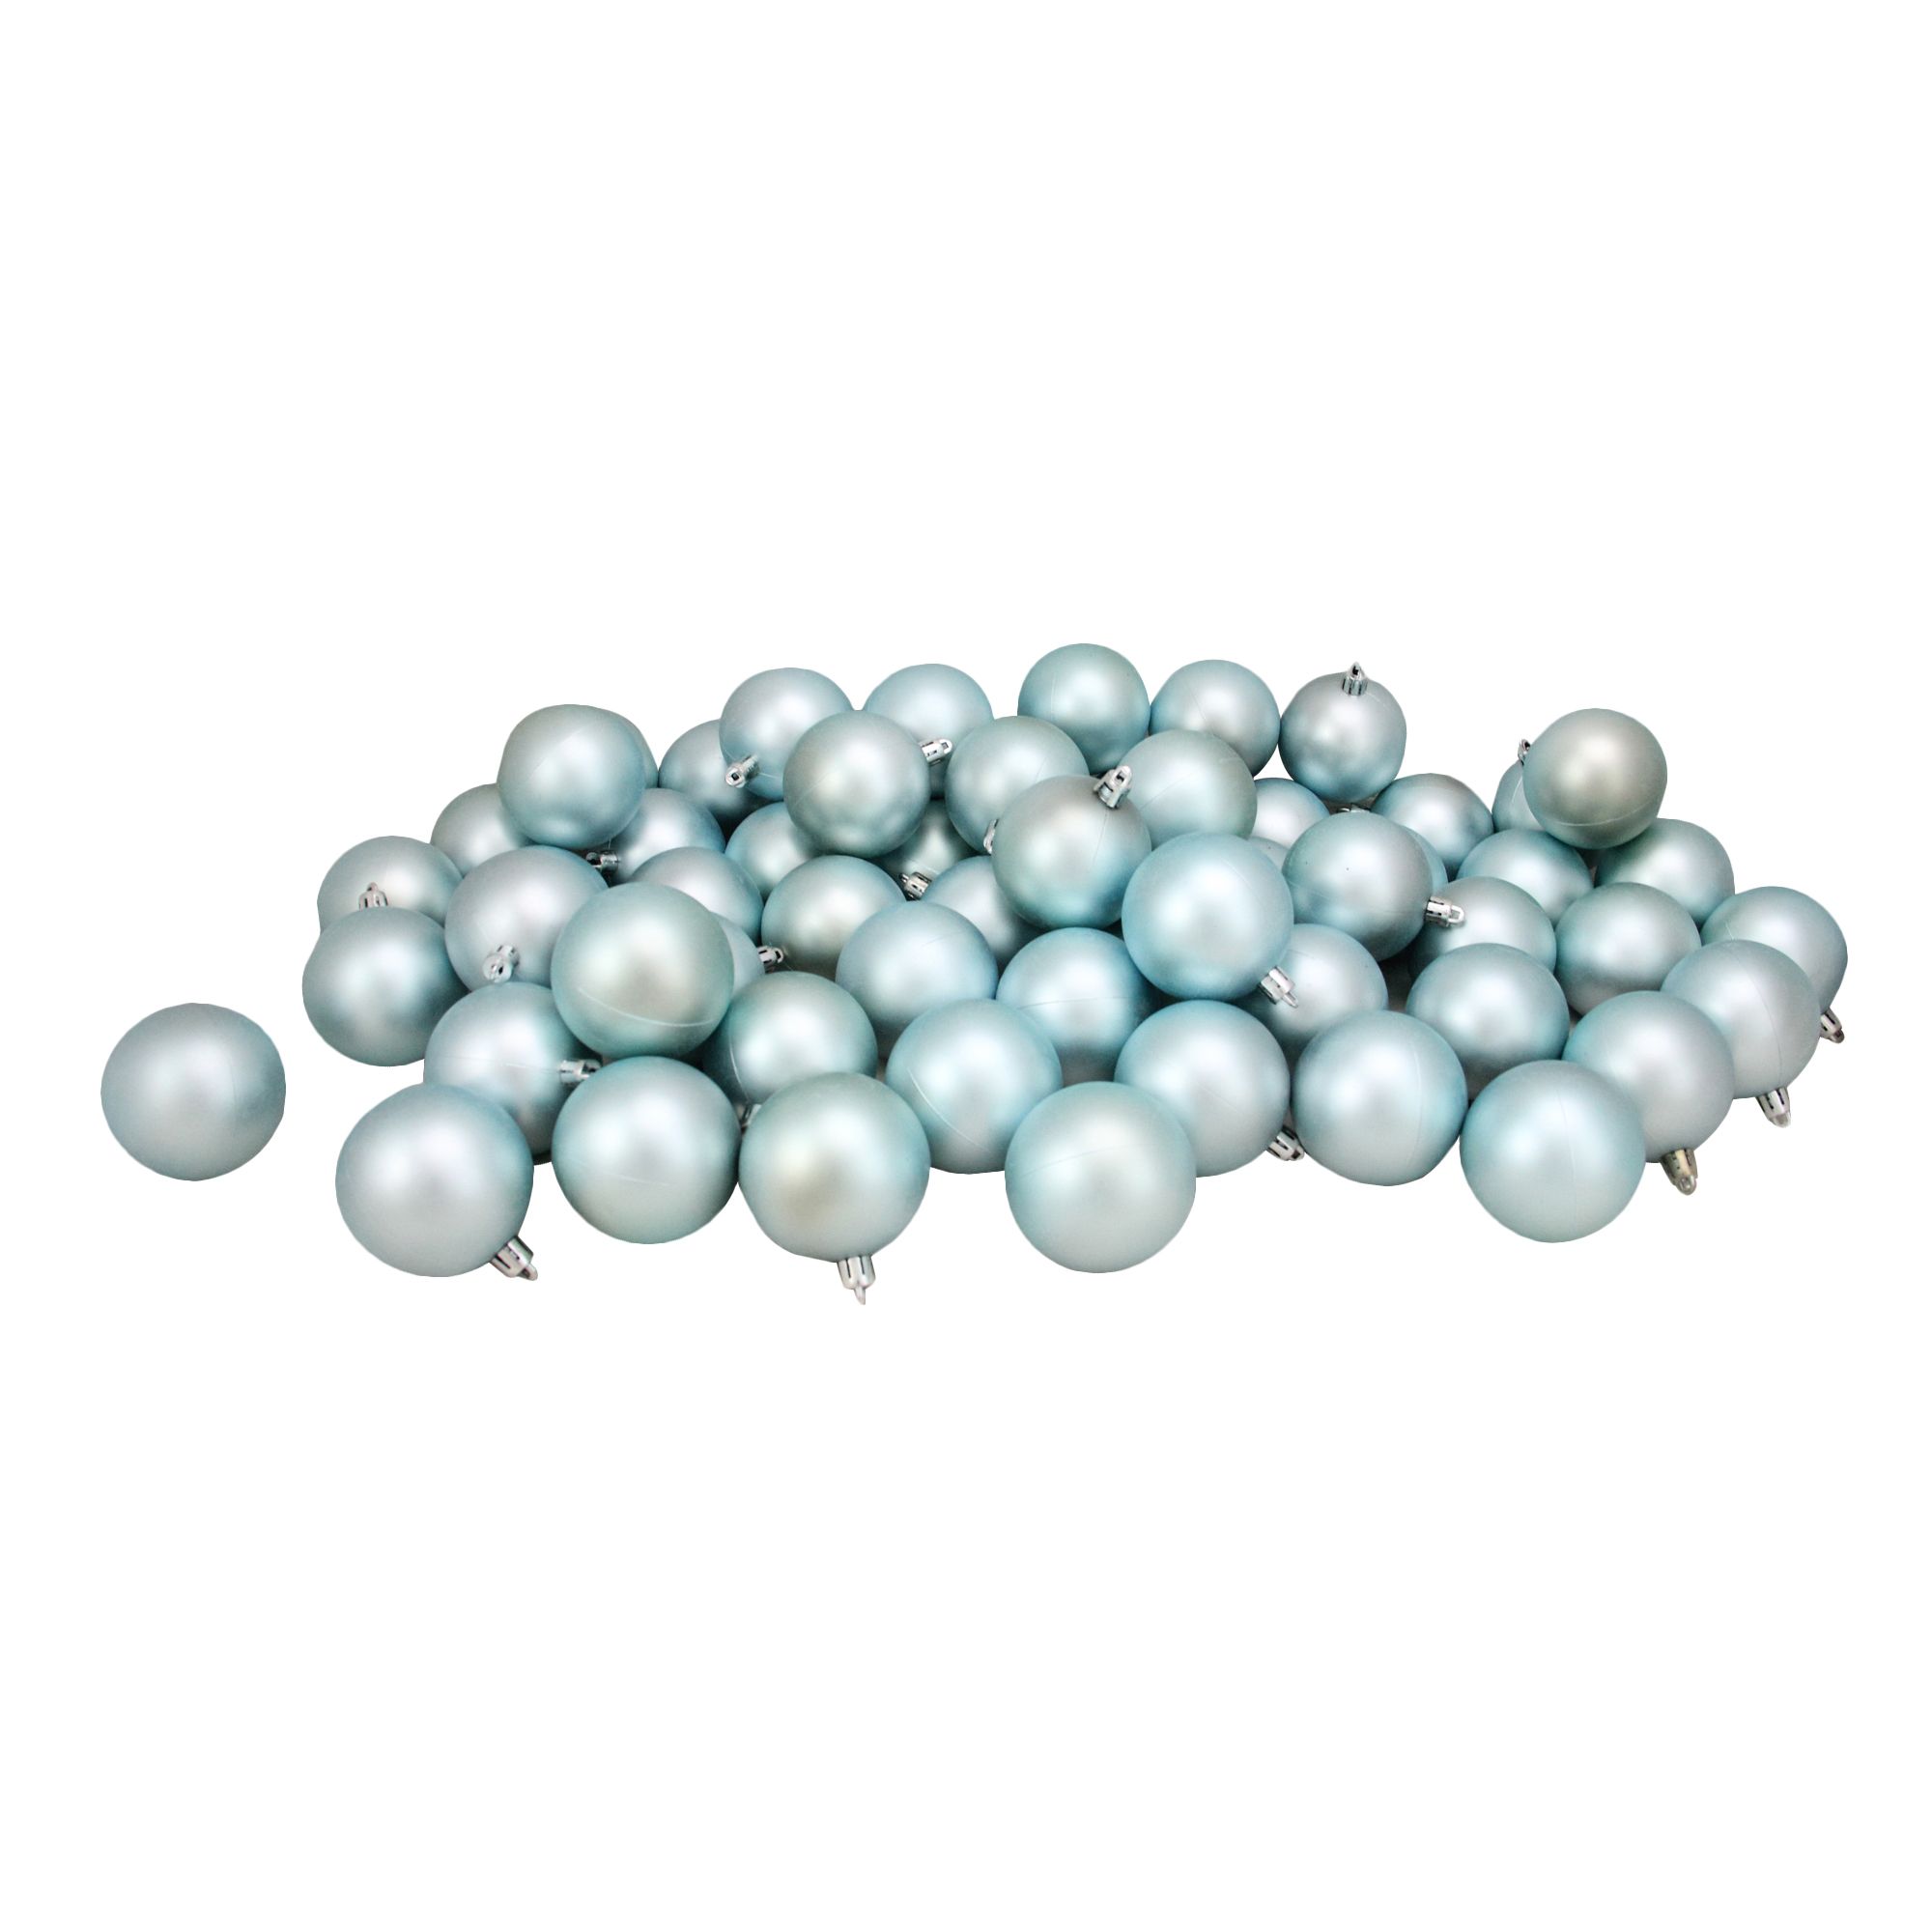 Northlight 2.5&quot; Shatterproof Matte Finish Christmas Ball Ornaments, 60 ct. - Baby Blue